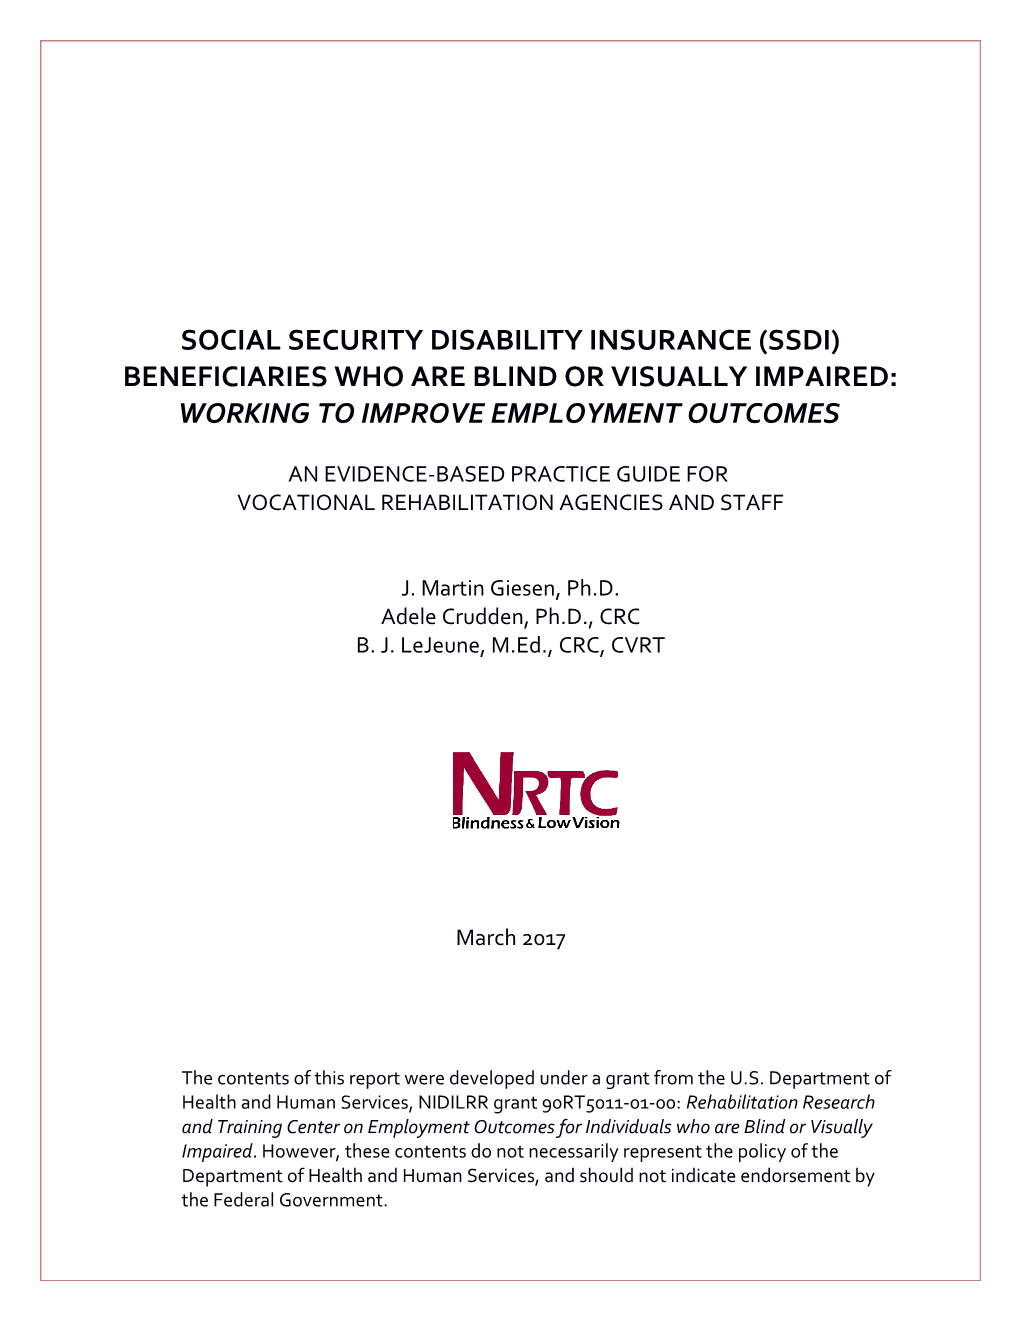 Social Security Disability Insurance (Ssdi) Beneficiaries Who Are Blind Or Visually Impaired